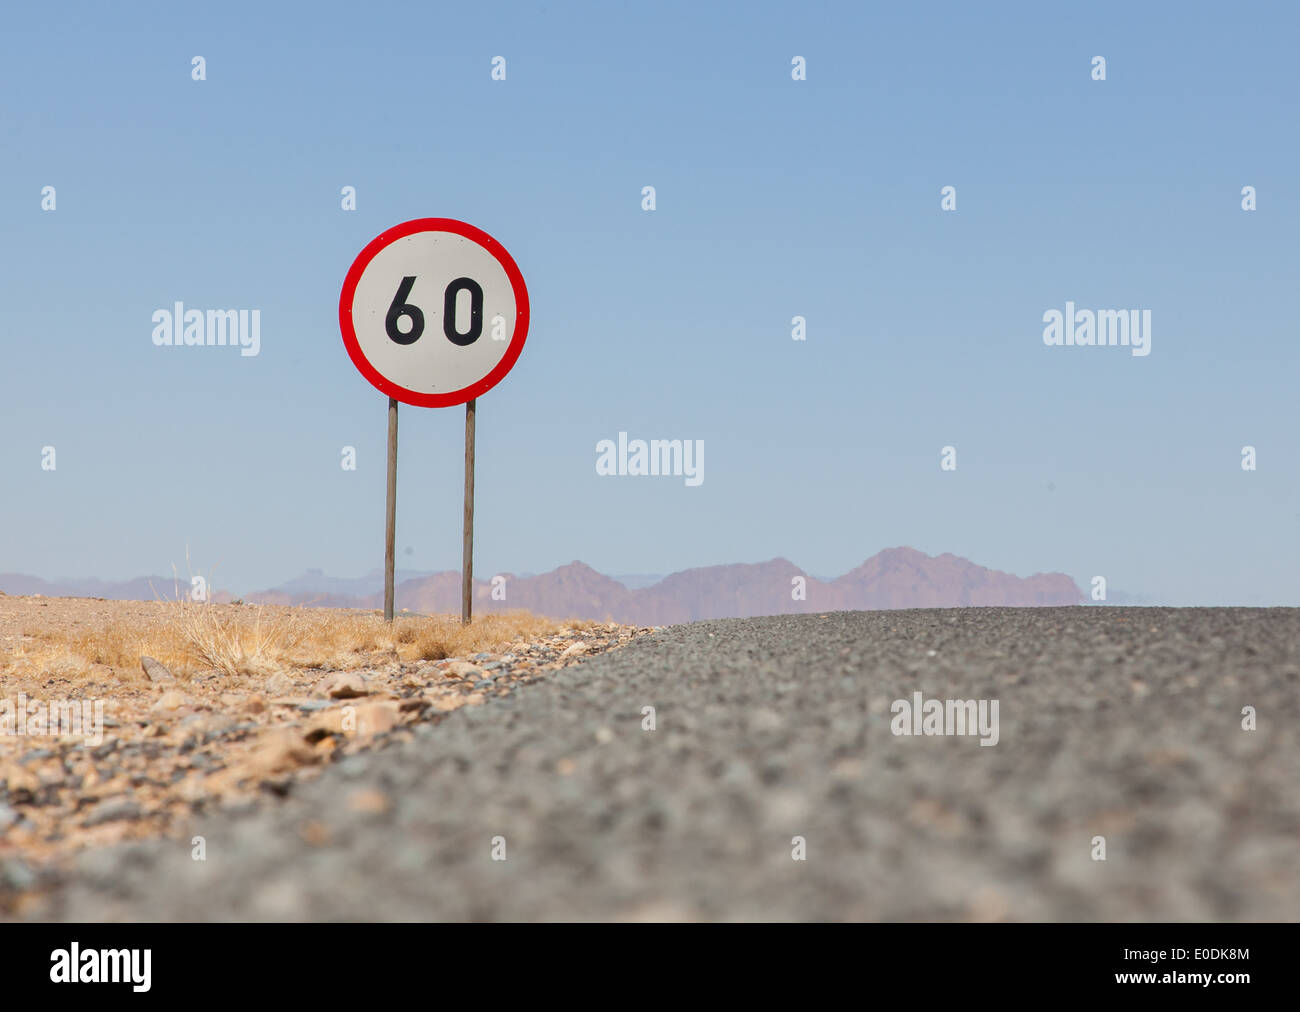 Speed limit sign at a desert road in Namibia, speed limit of 60 kph Stock Photo